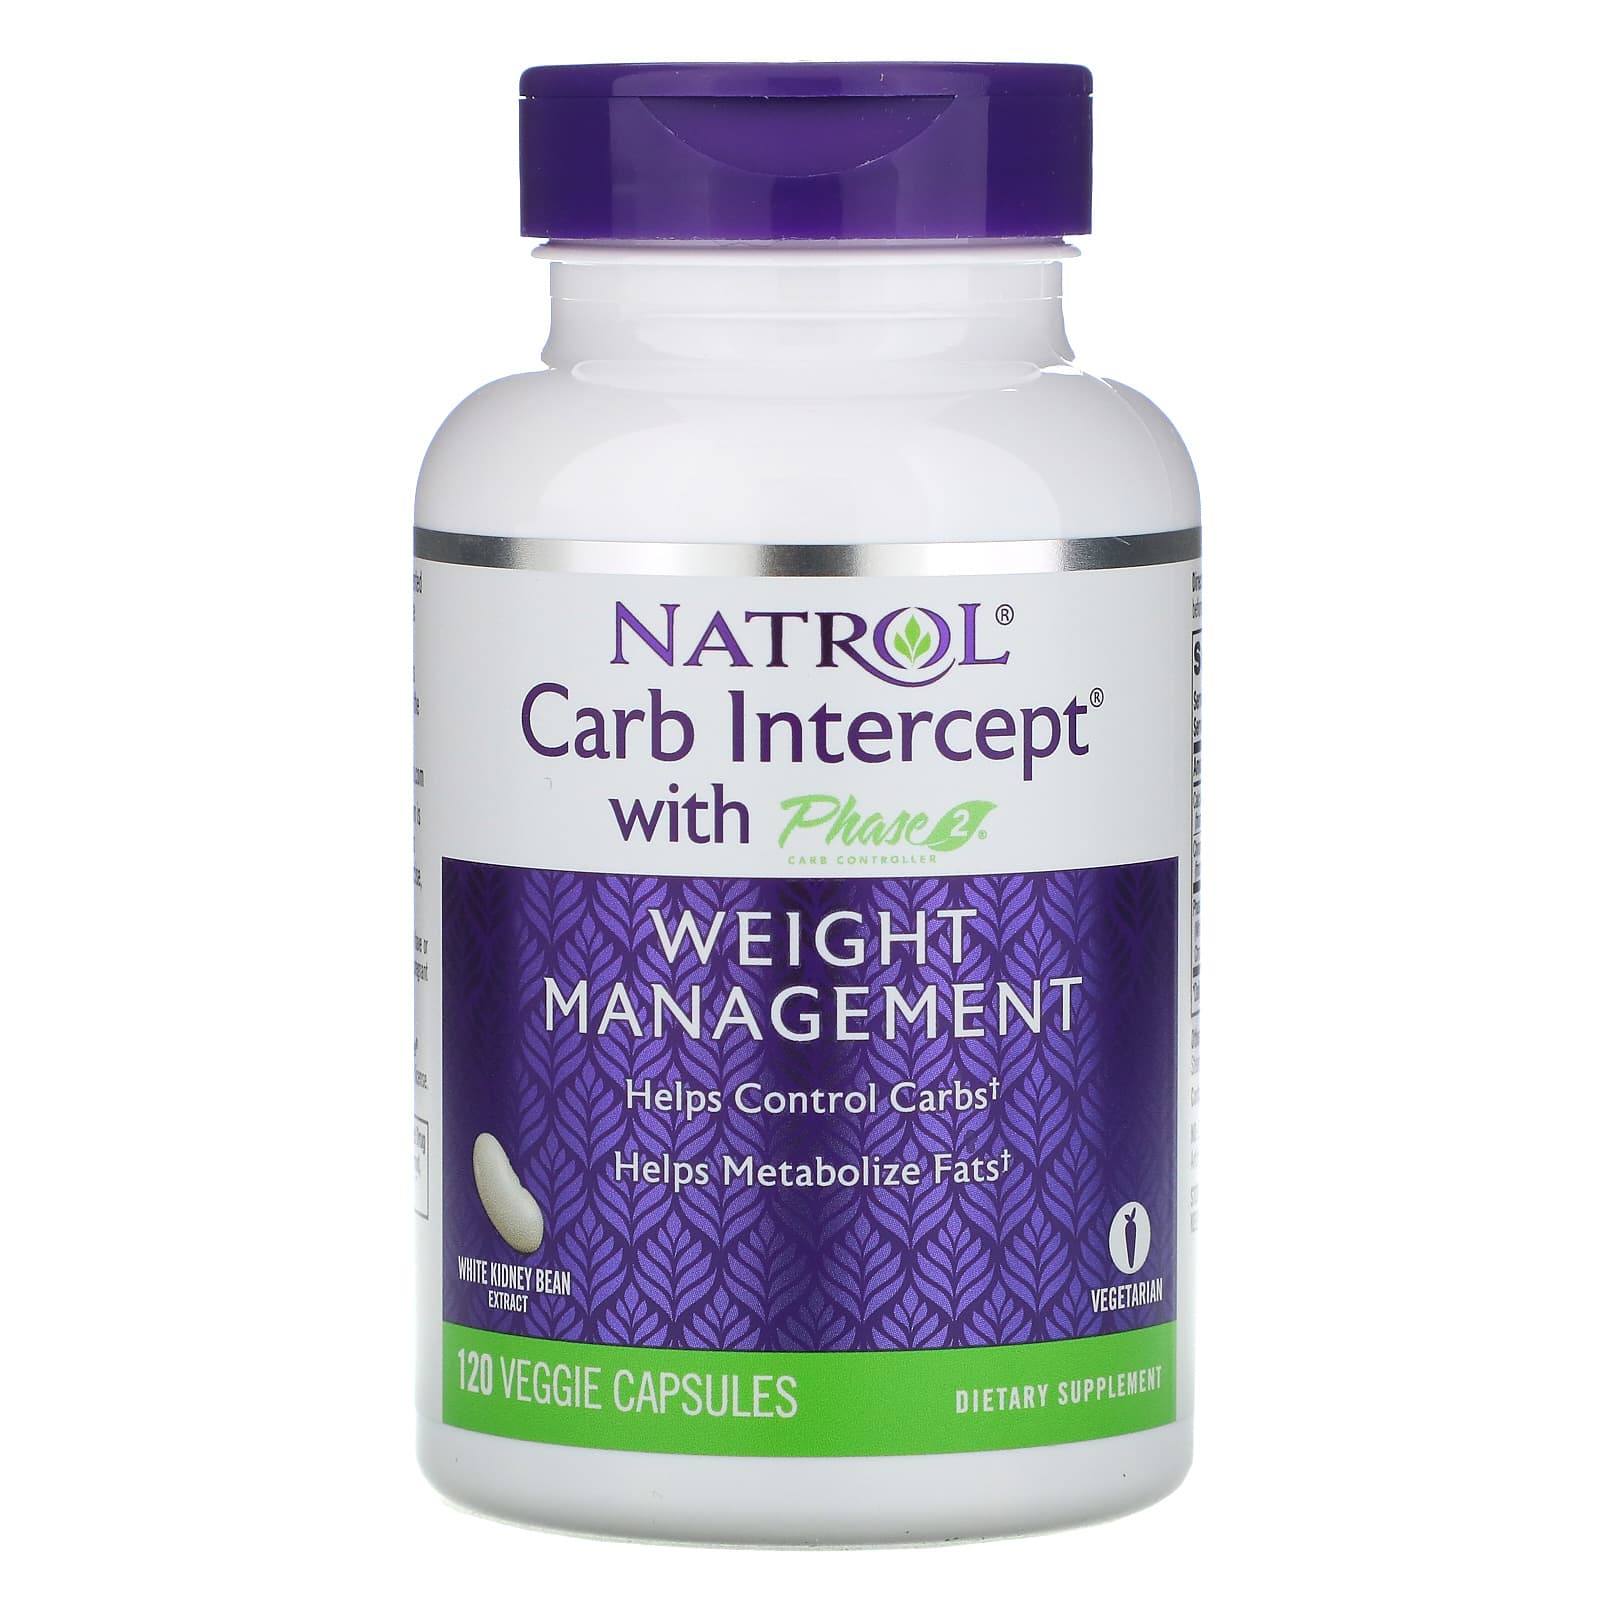 Natrol Carb Intercept with Phase 2 Carb Controller 1000 mg - 120 Veggie Capsules